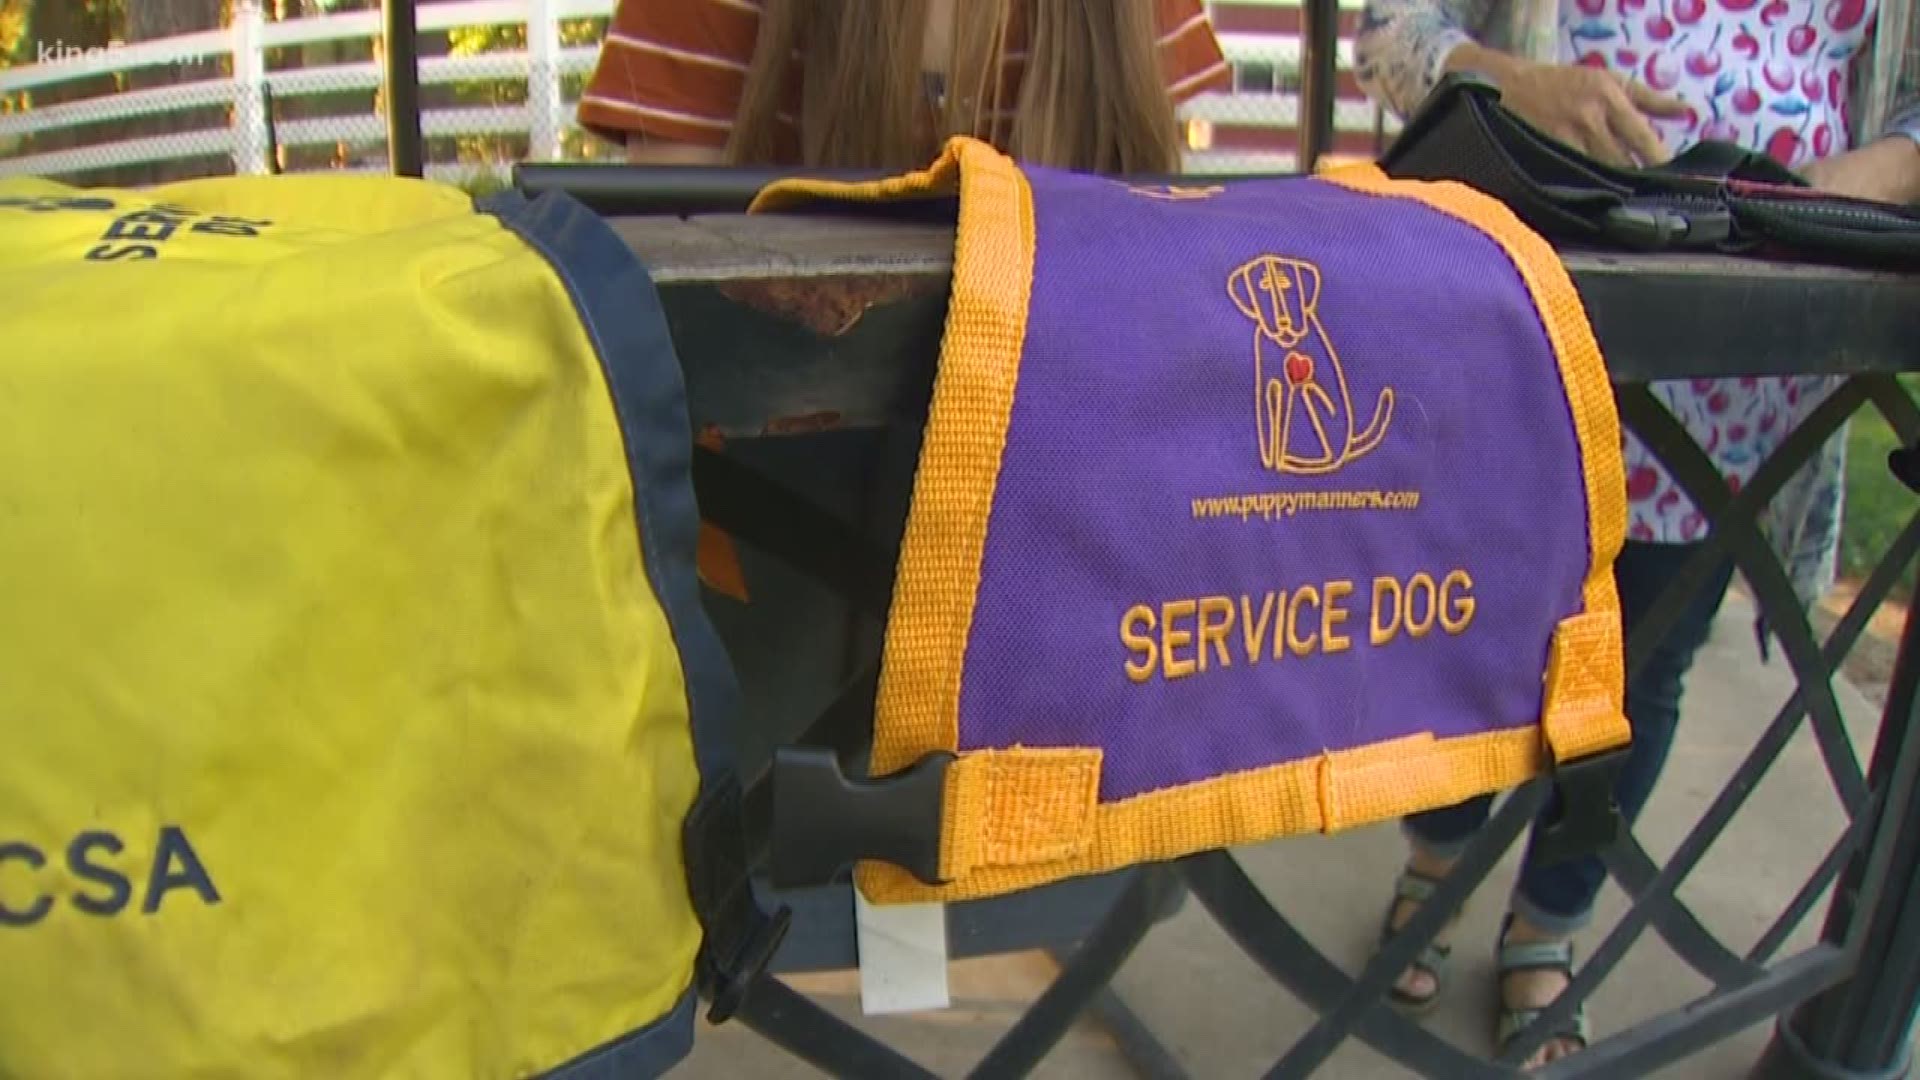 Photos showing a vendor selling service dog vests at the Washington State Fair caused a stir among the disability community. So, what are the rules? KING 5's Ted Land verifies.